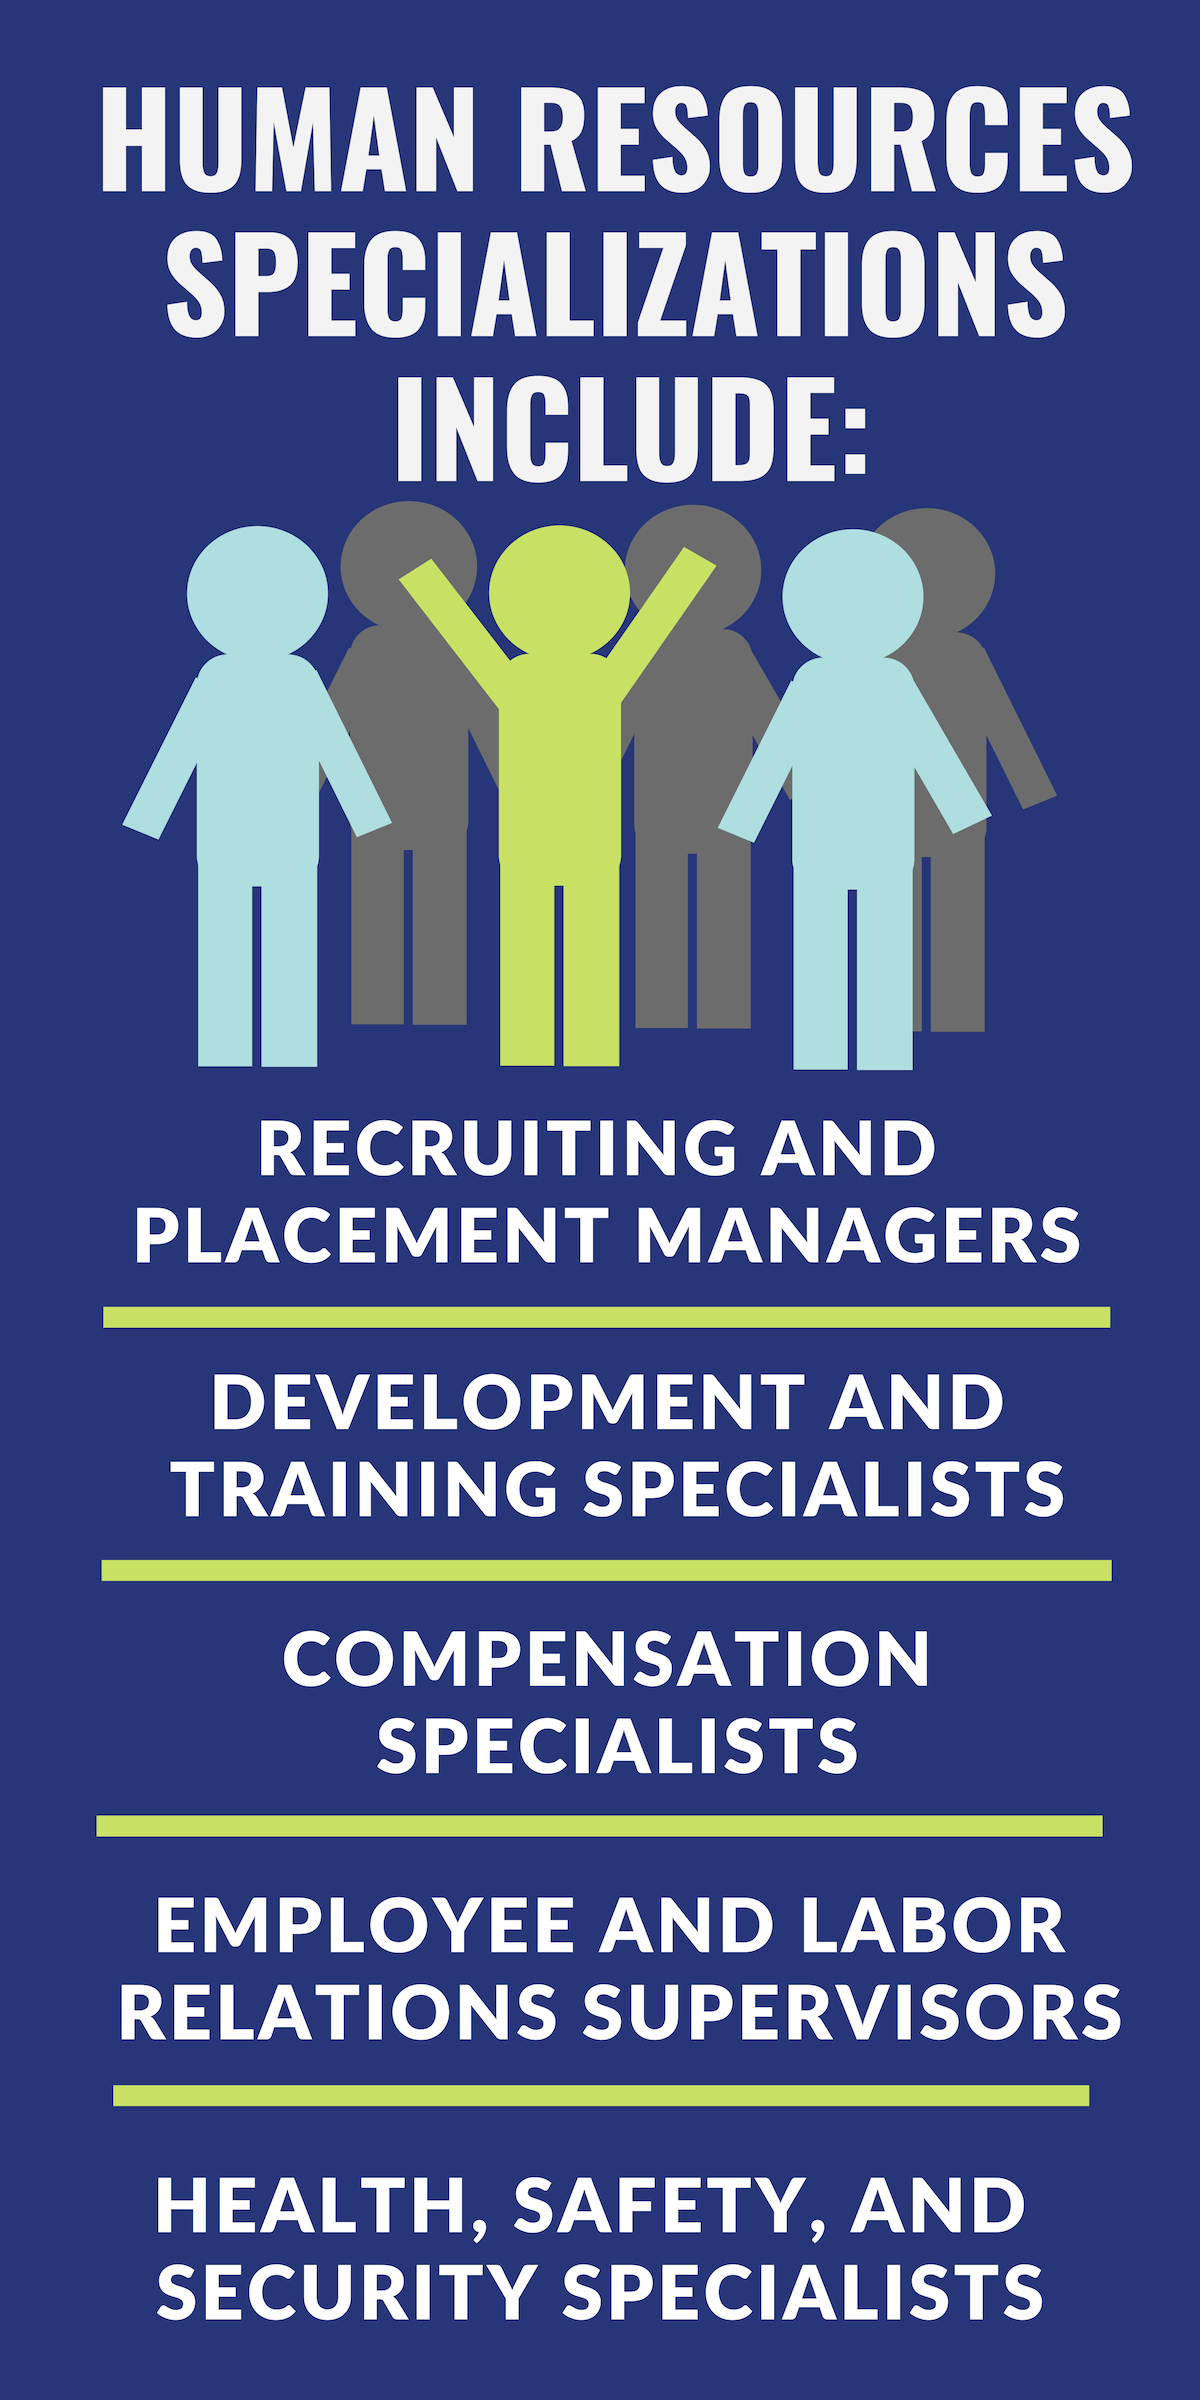 Human resources specializations include: recruiting and placement managers, development and training specialists, compensation specialists, employee and labor relations supervisors, health safety and security specialists.